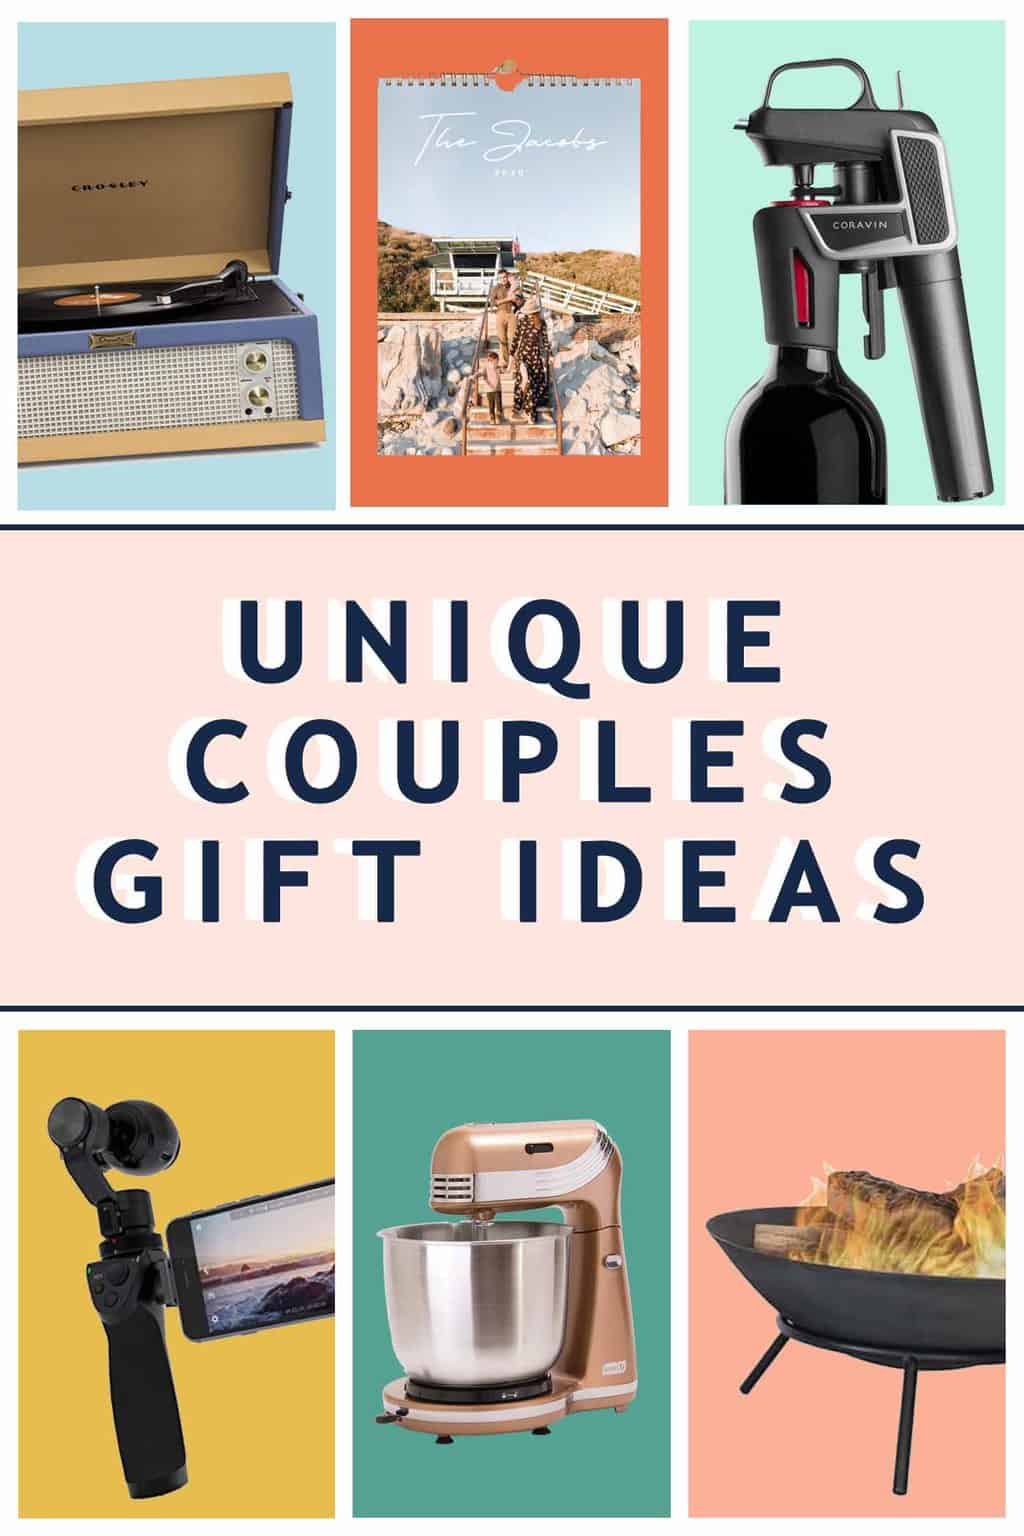 Unique Wedding Gifts for Fun-Loving and Millennial Couples